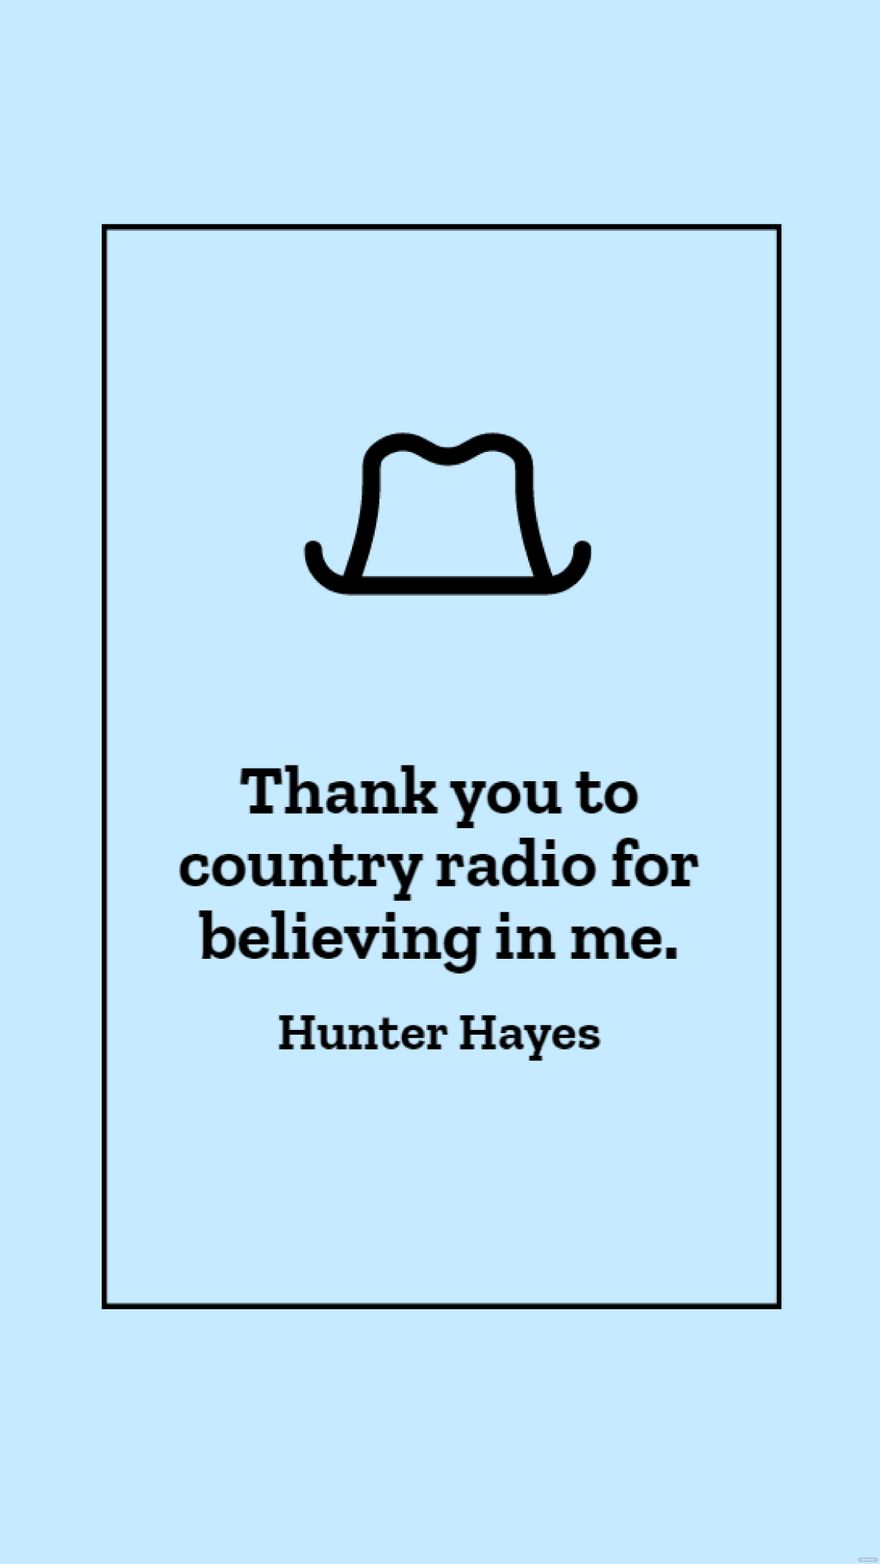 Hunter Hayes - Thank you to country radio for believing in me. in JPG